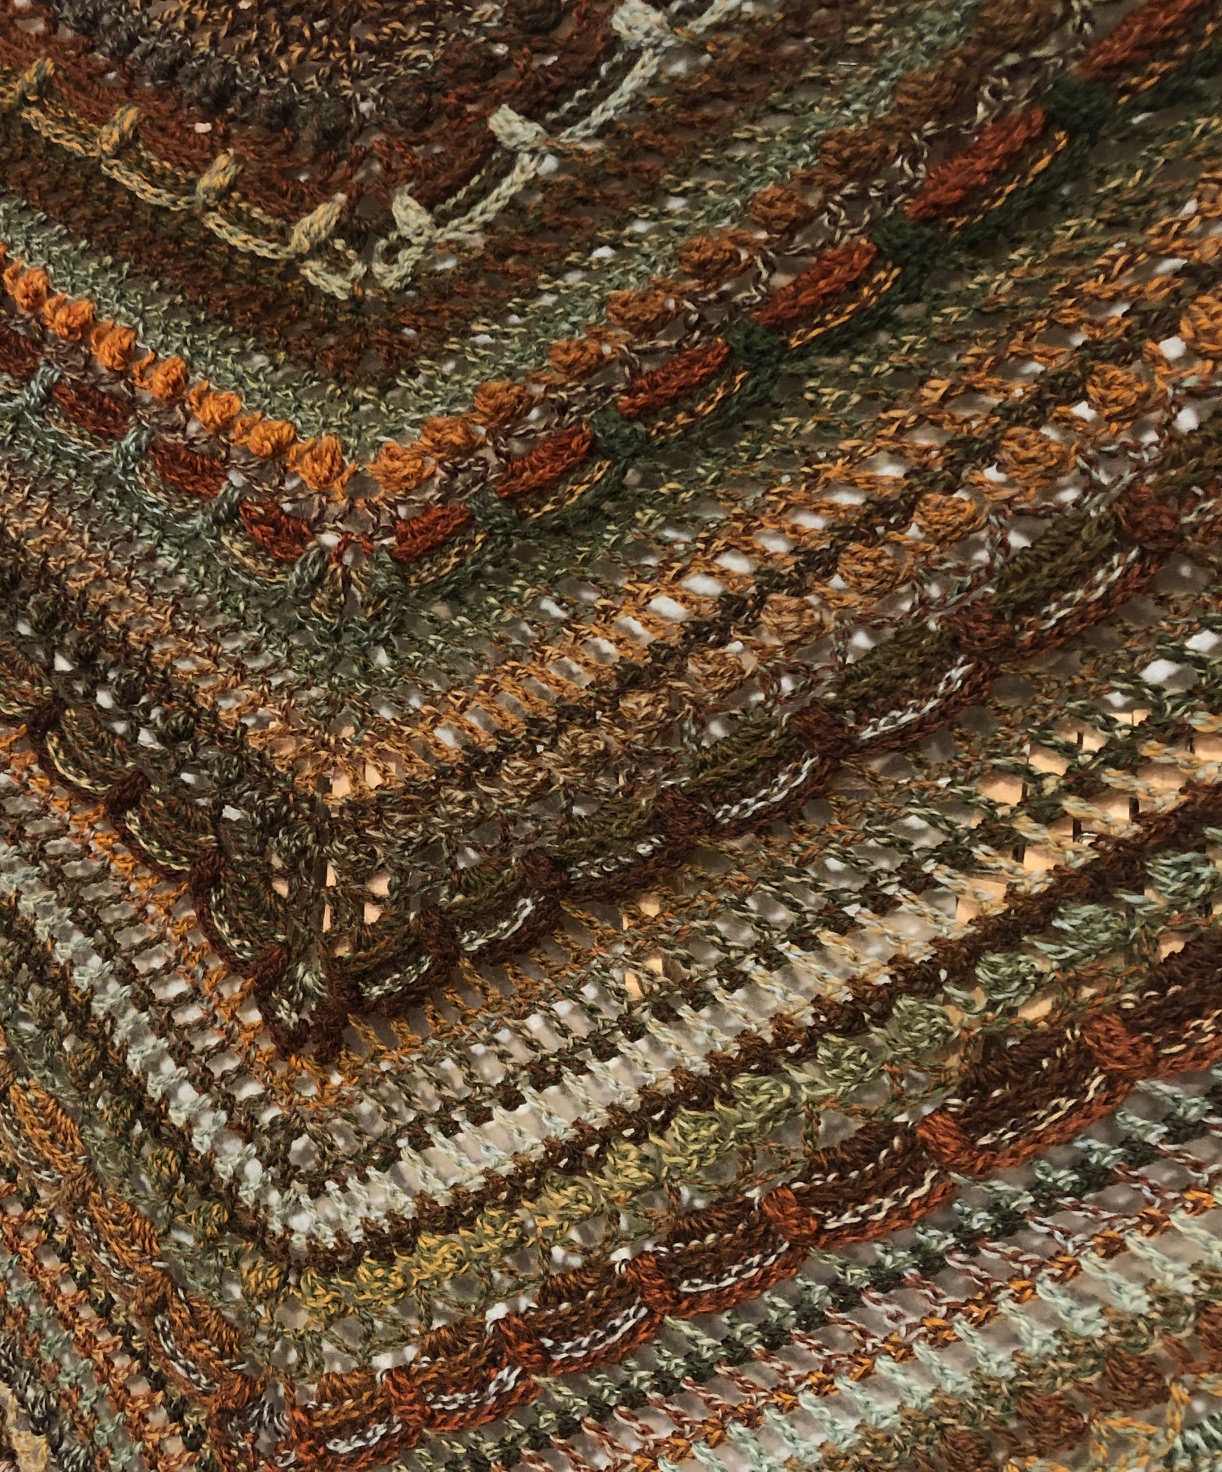 close-up view of crocheted shawl in browns and fall colors